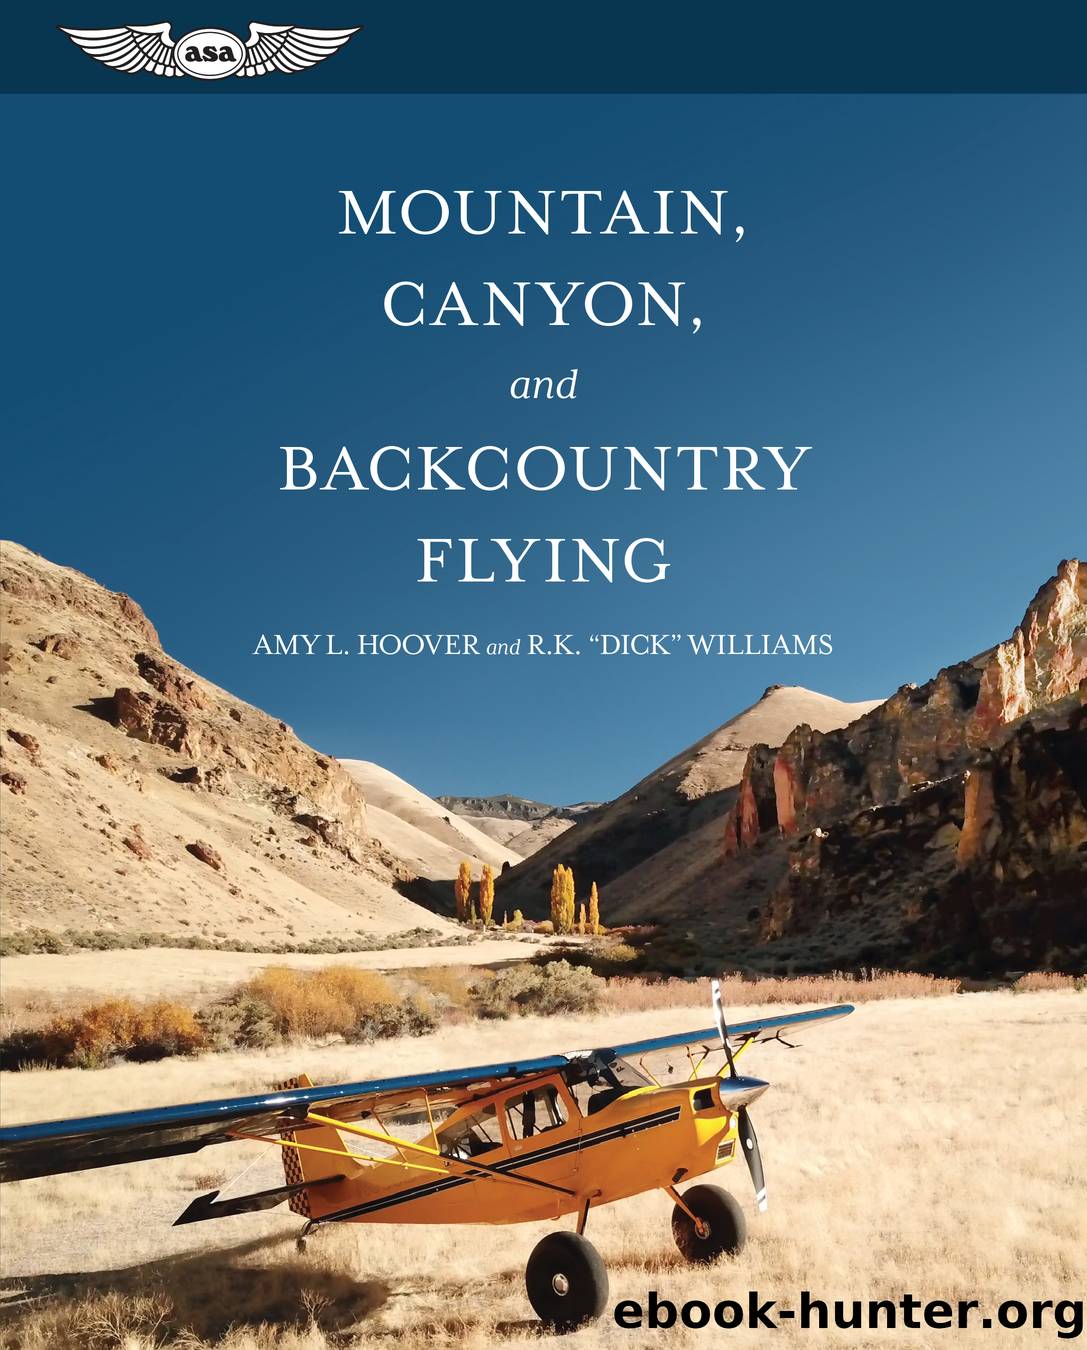 Mountain, Canyon, and Backcountry Flying by Amy L. Hoover